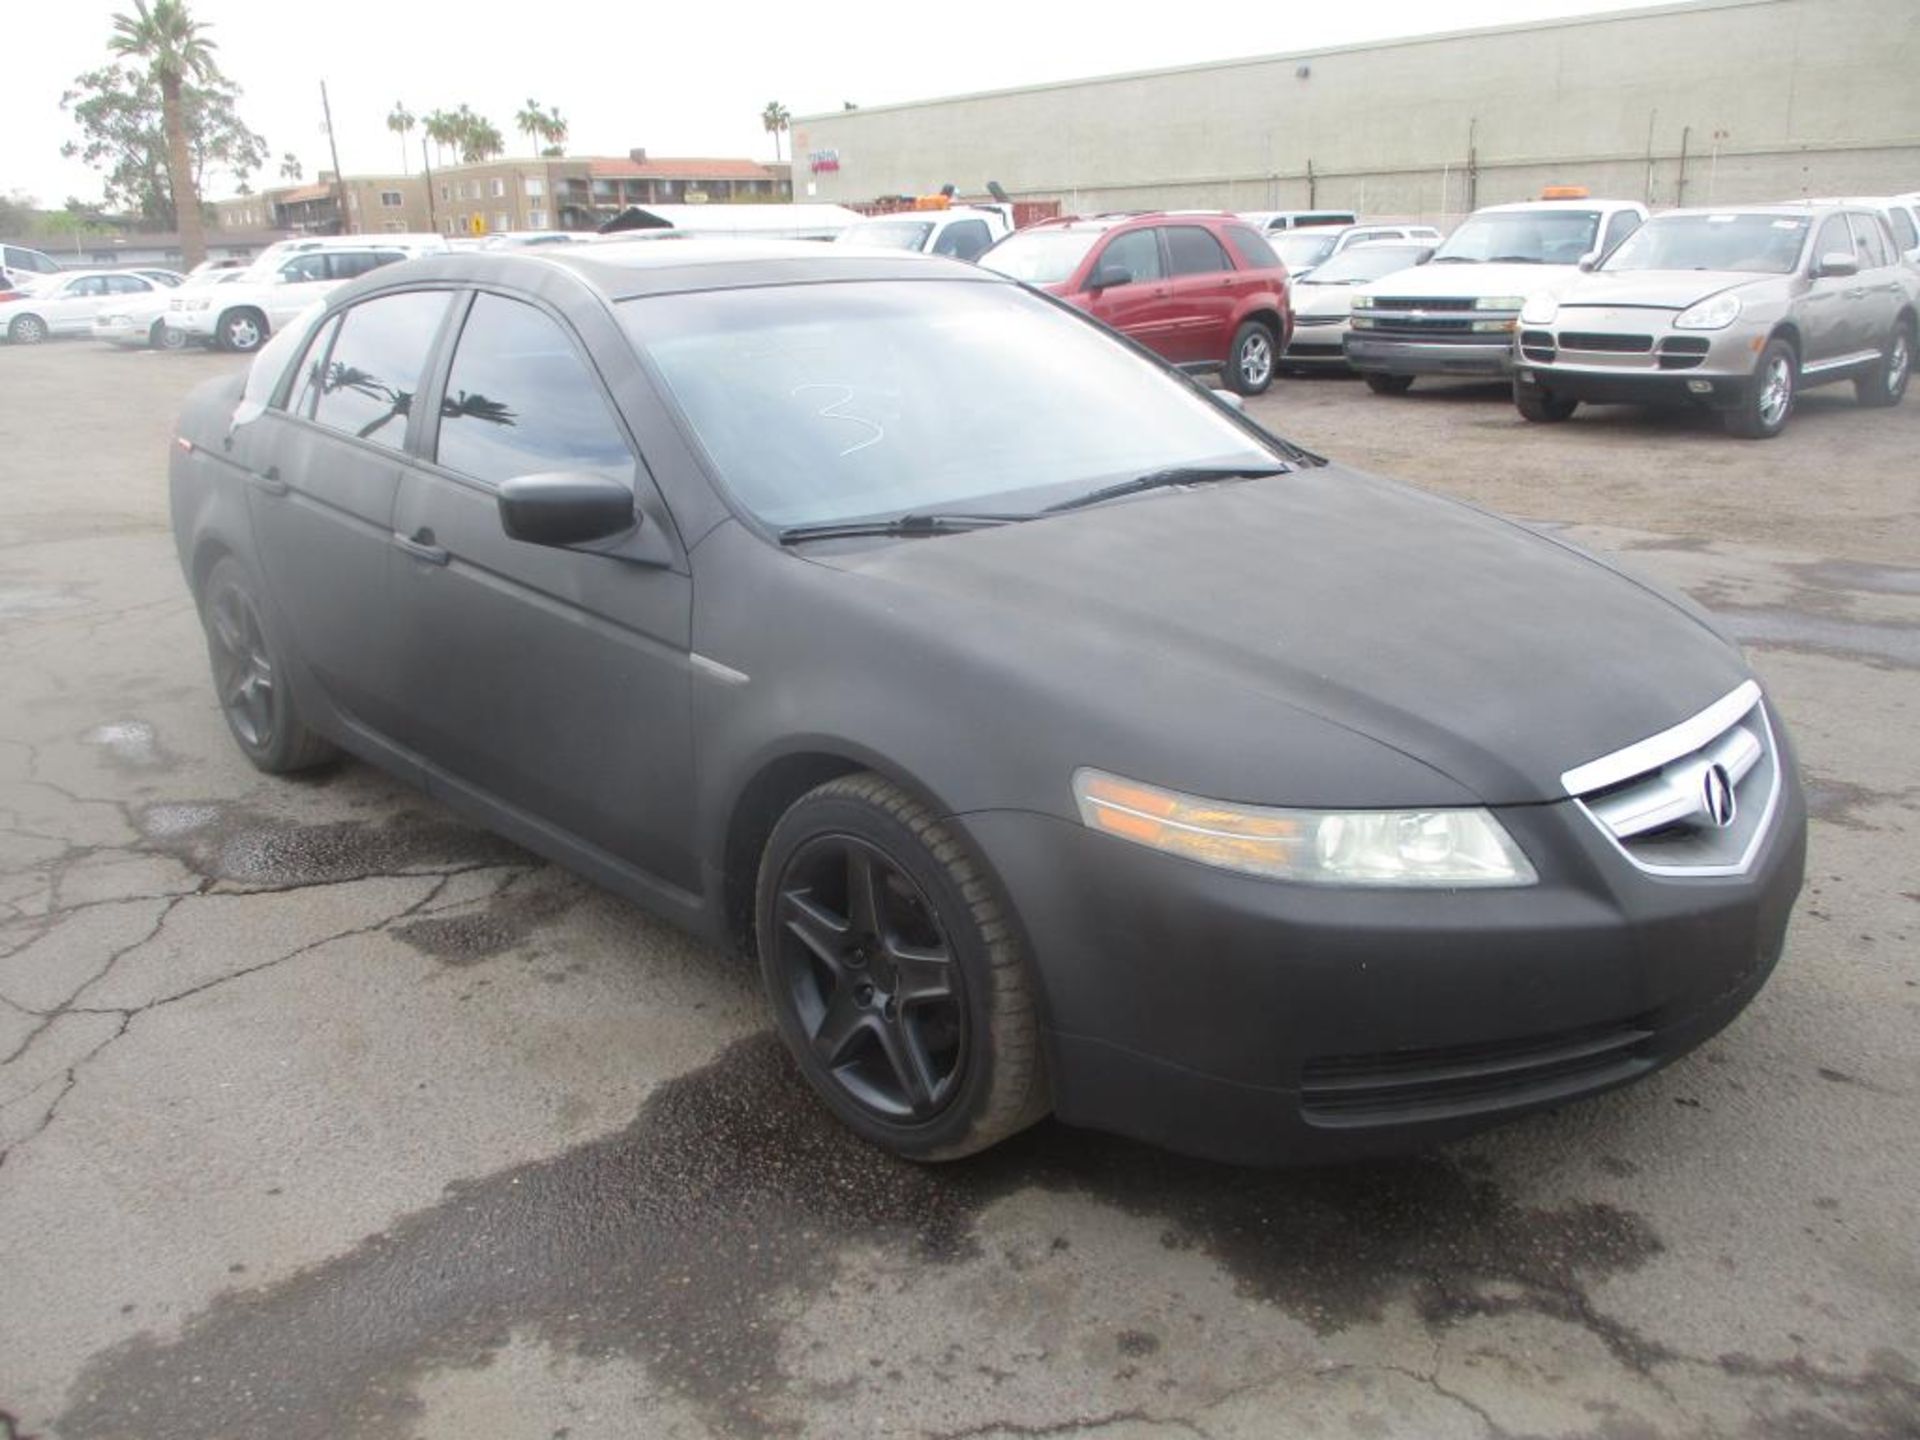 2004 Acura TL - Image 4 of 11